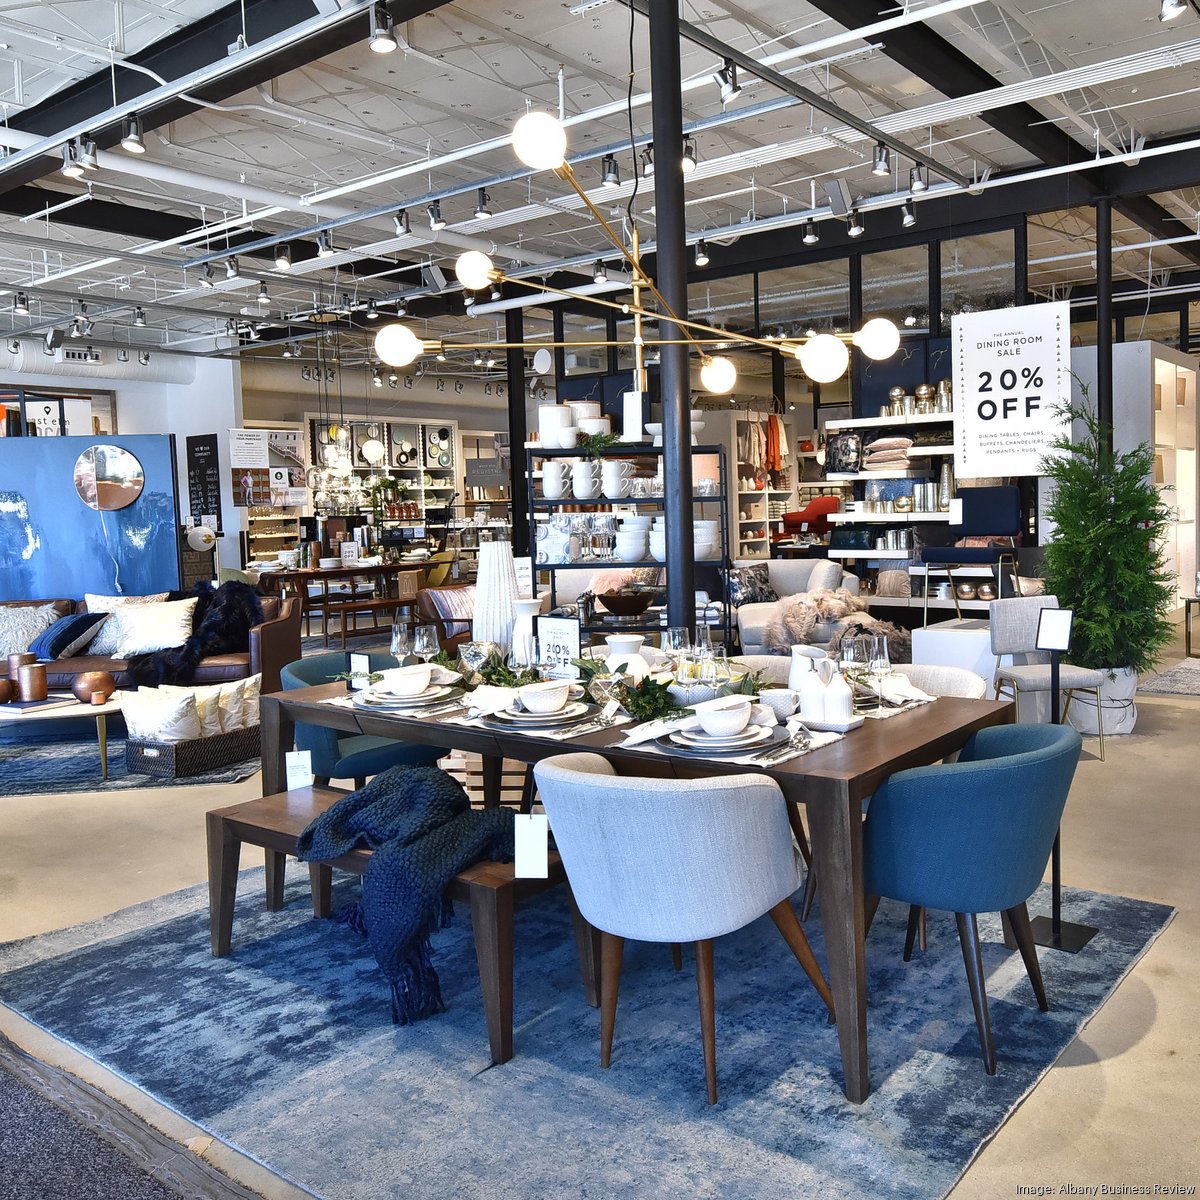 West Elm home furnishings store in Minneapolis' North Loop opens Thursday